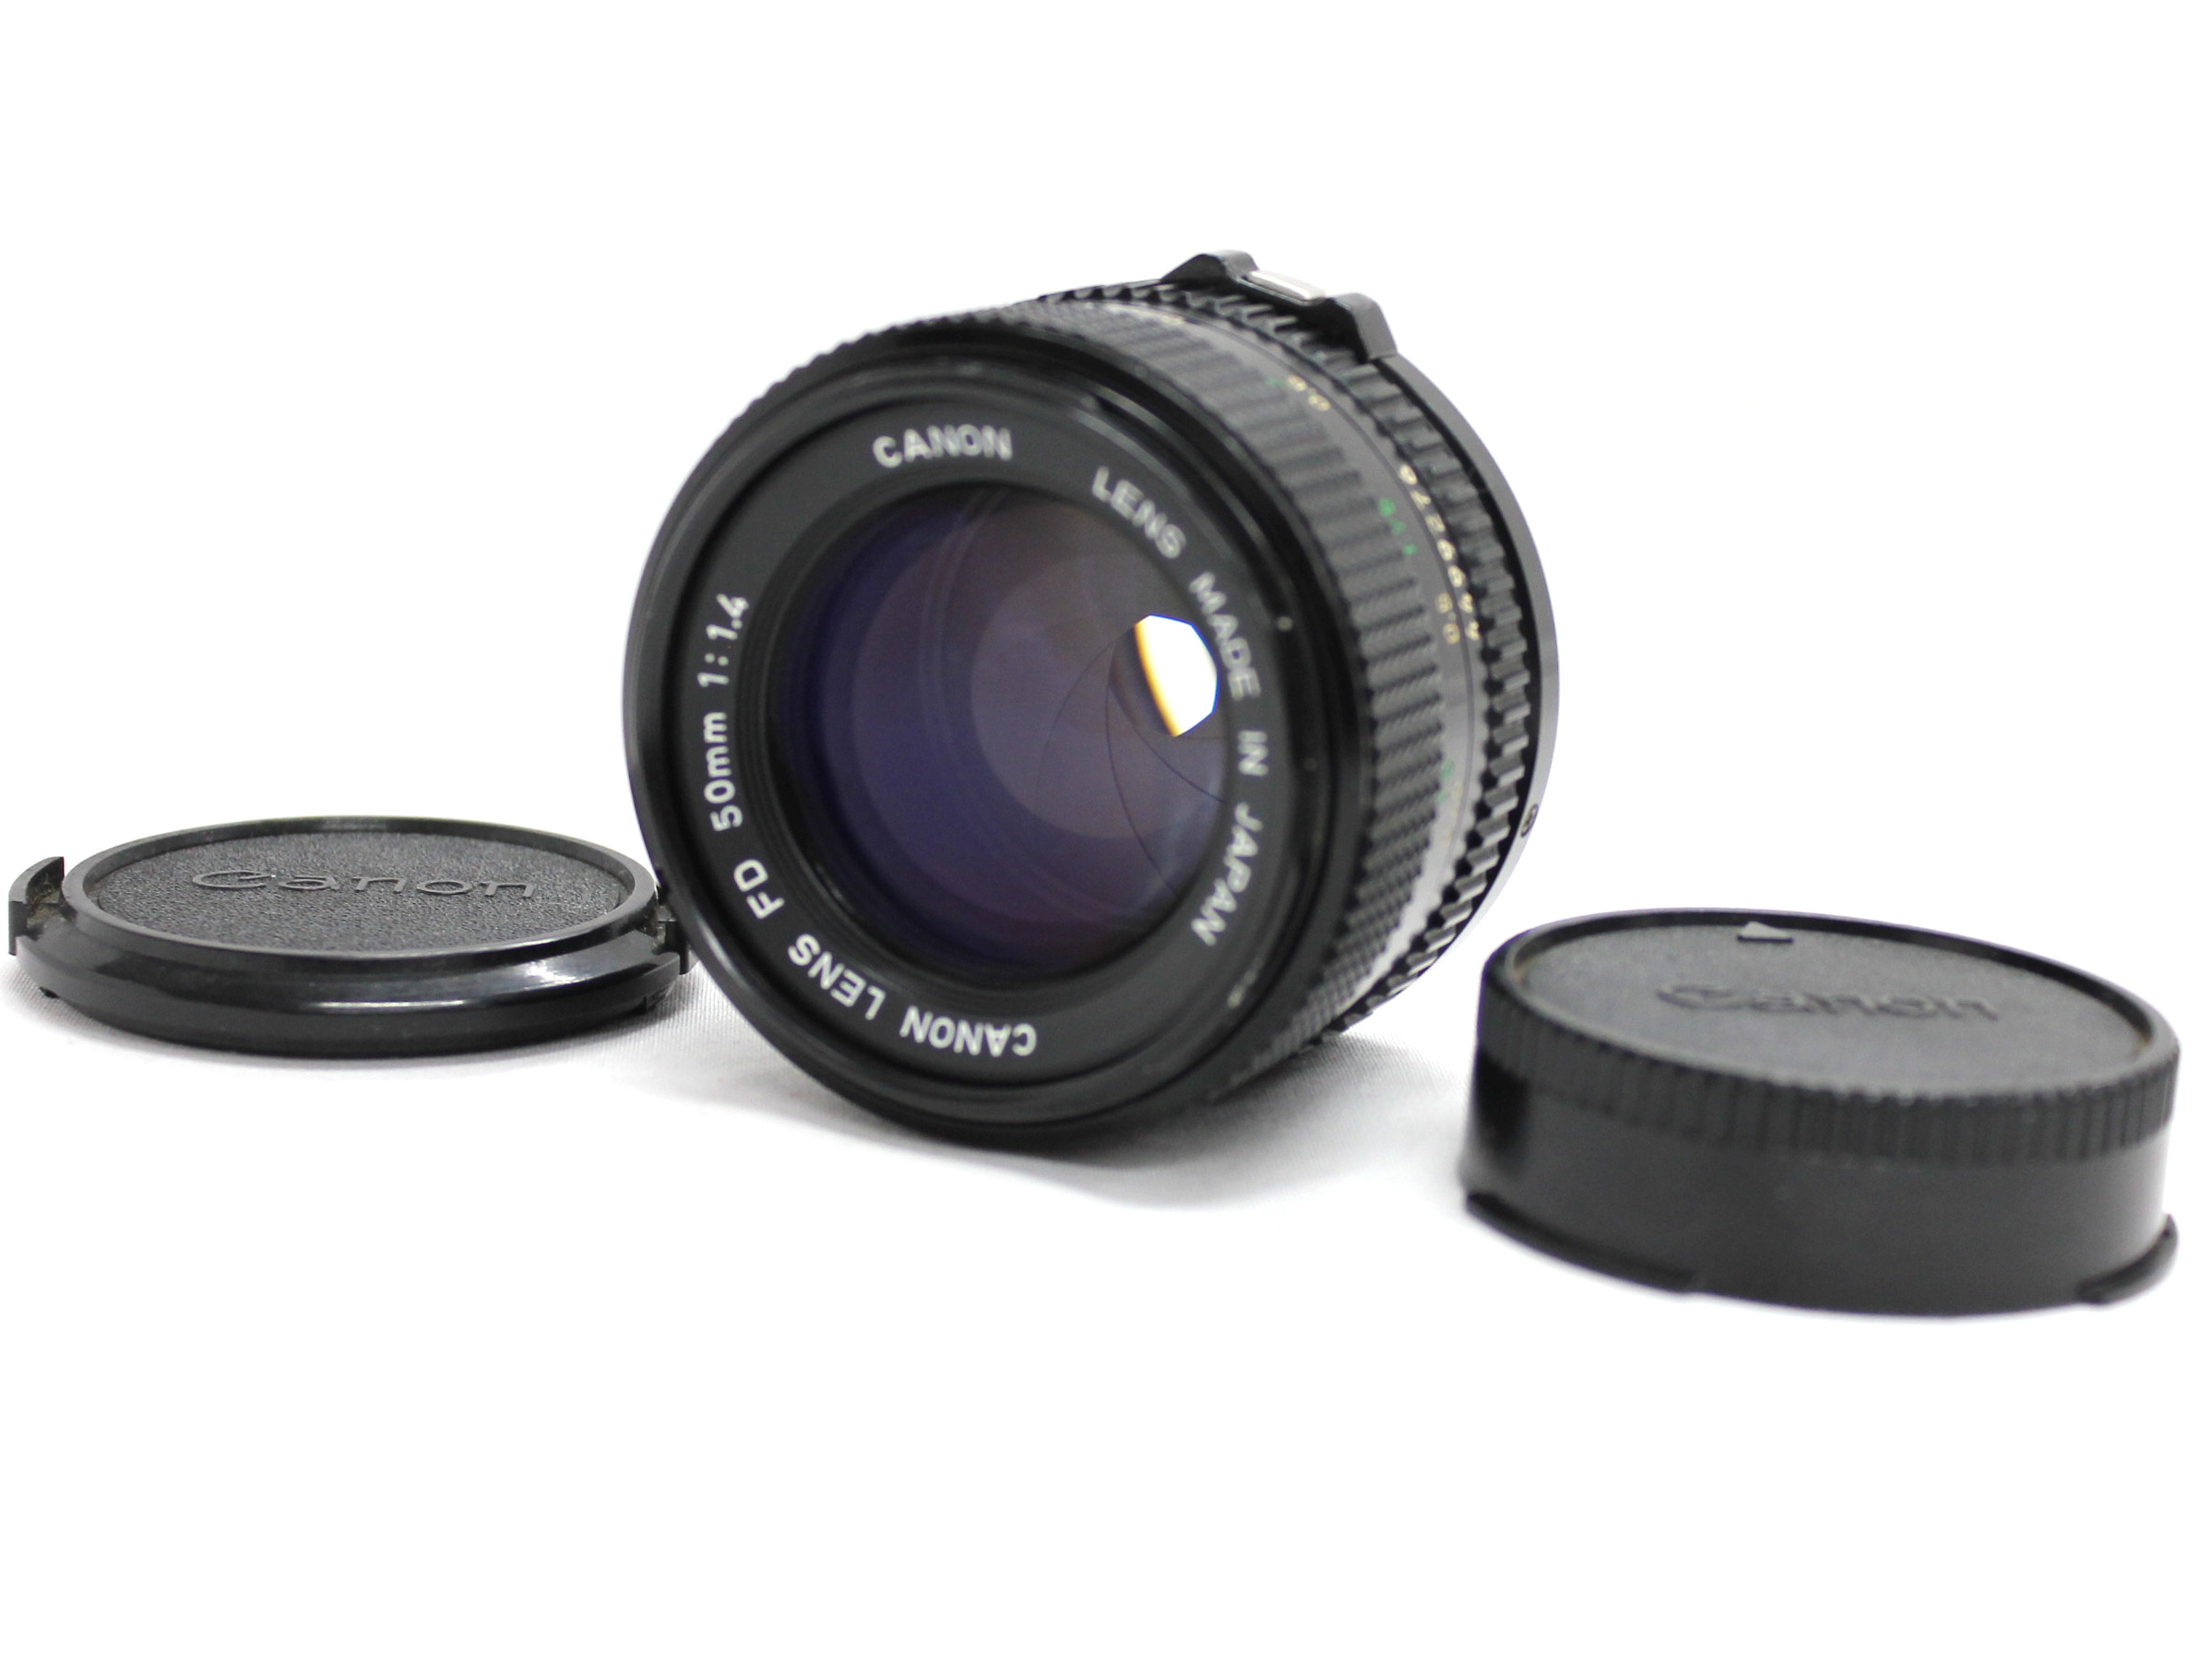 Japan Used Camera Shop | [Excellent+++++] Canon New FD NFD 50mm F/1.4 MF Prime Lens from Japan